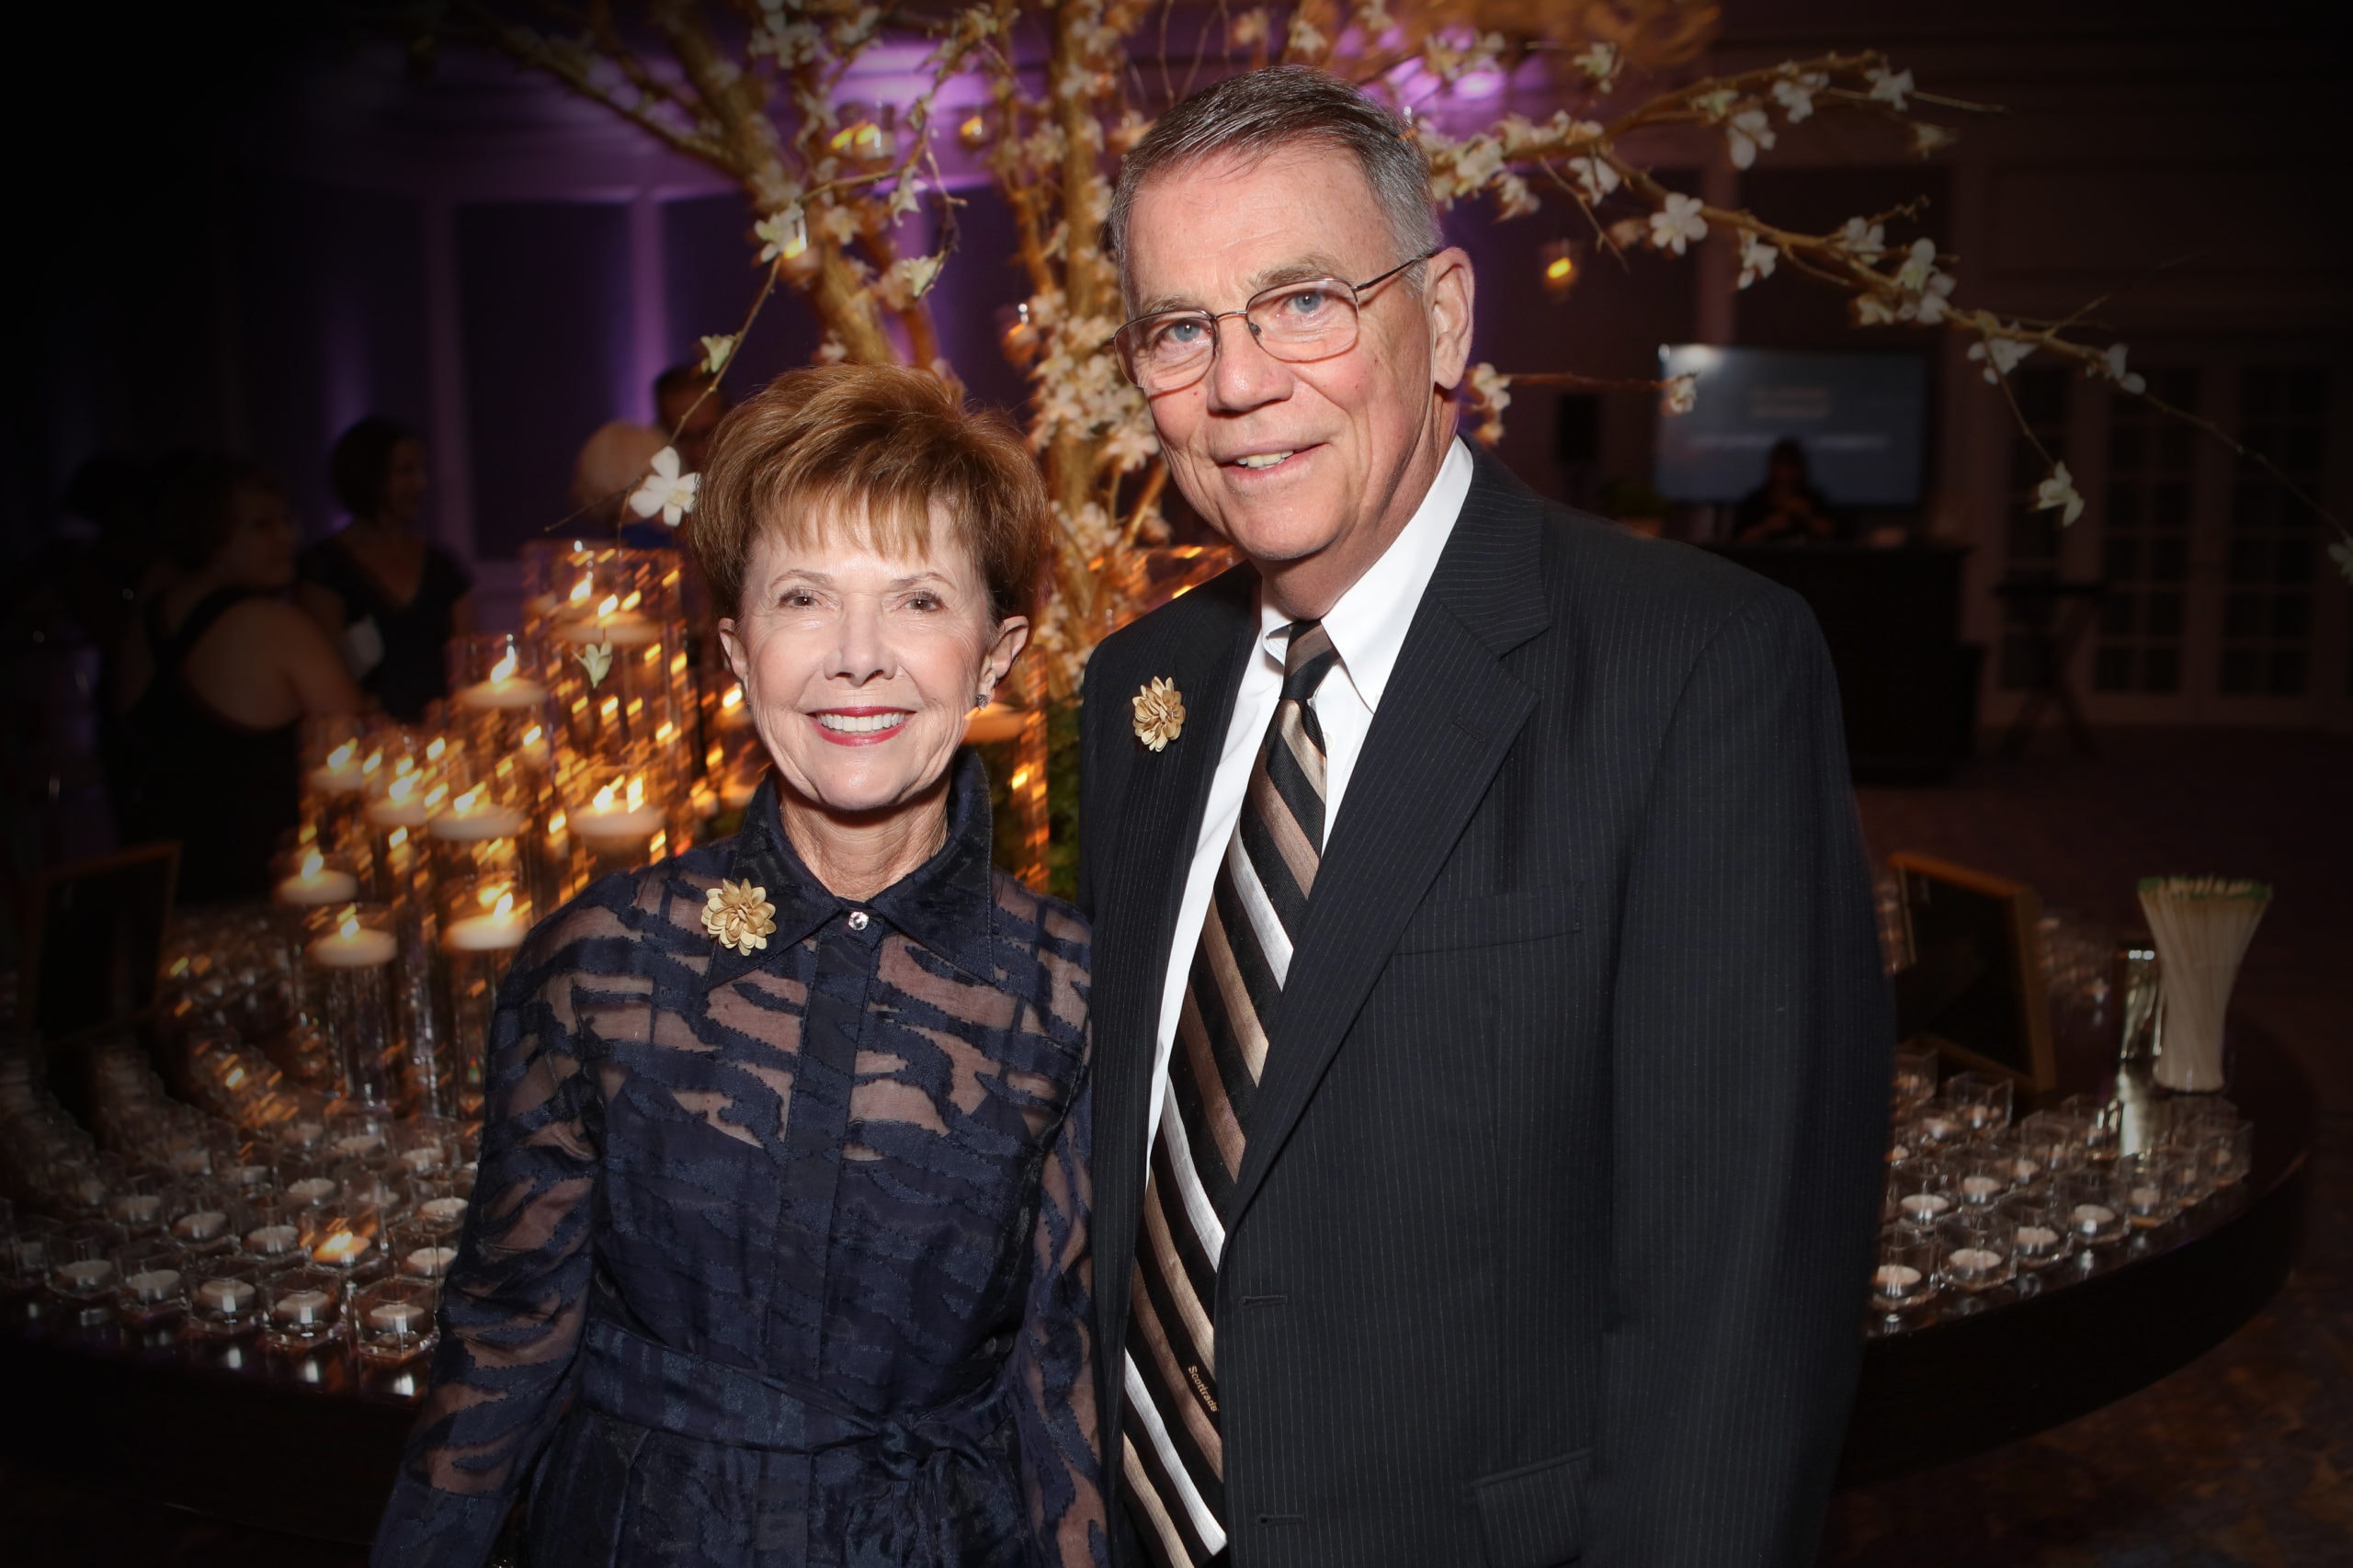 The Paula and Rodger Riney Foundation's gift will support multiple myeloma research at the UAMS Myeloma Center.